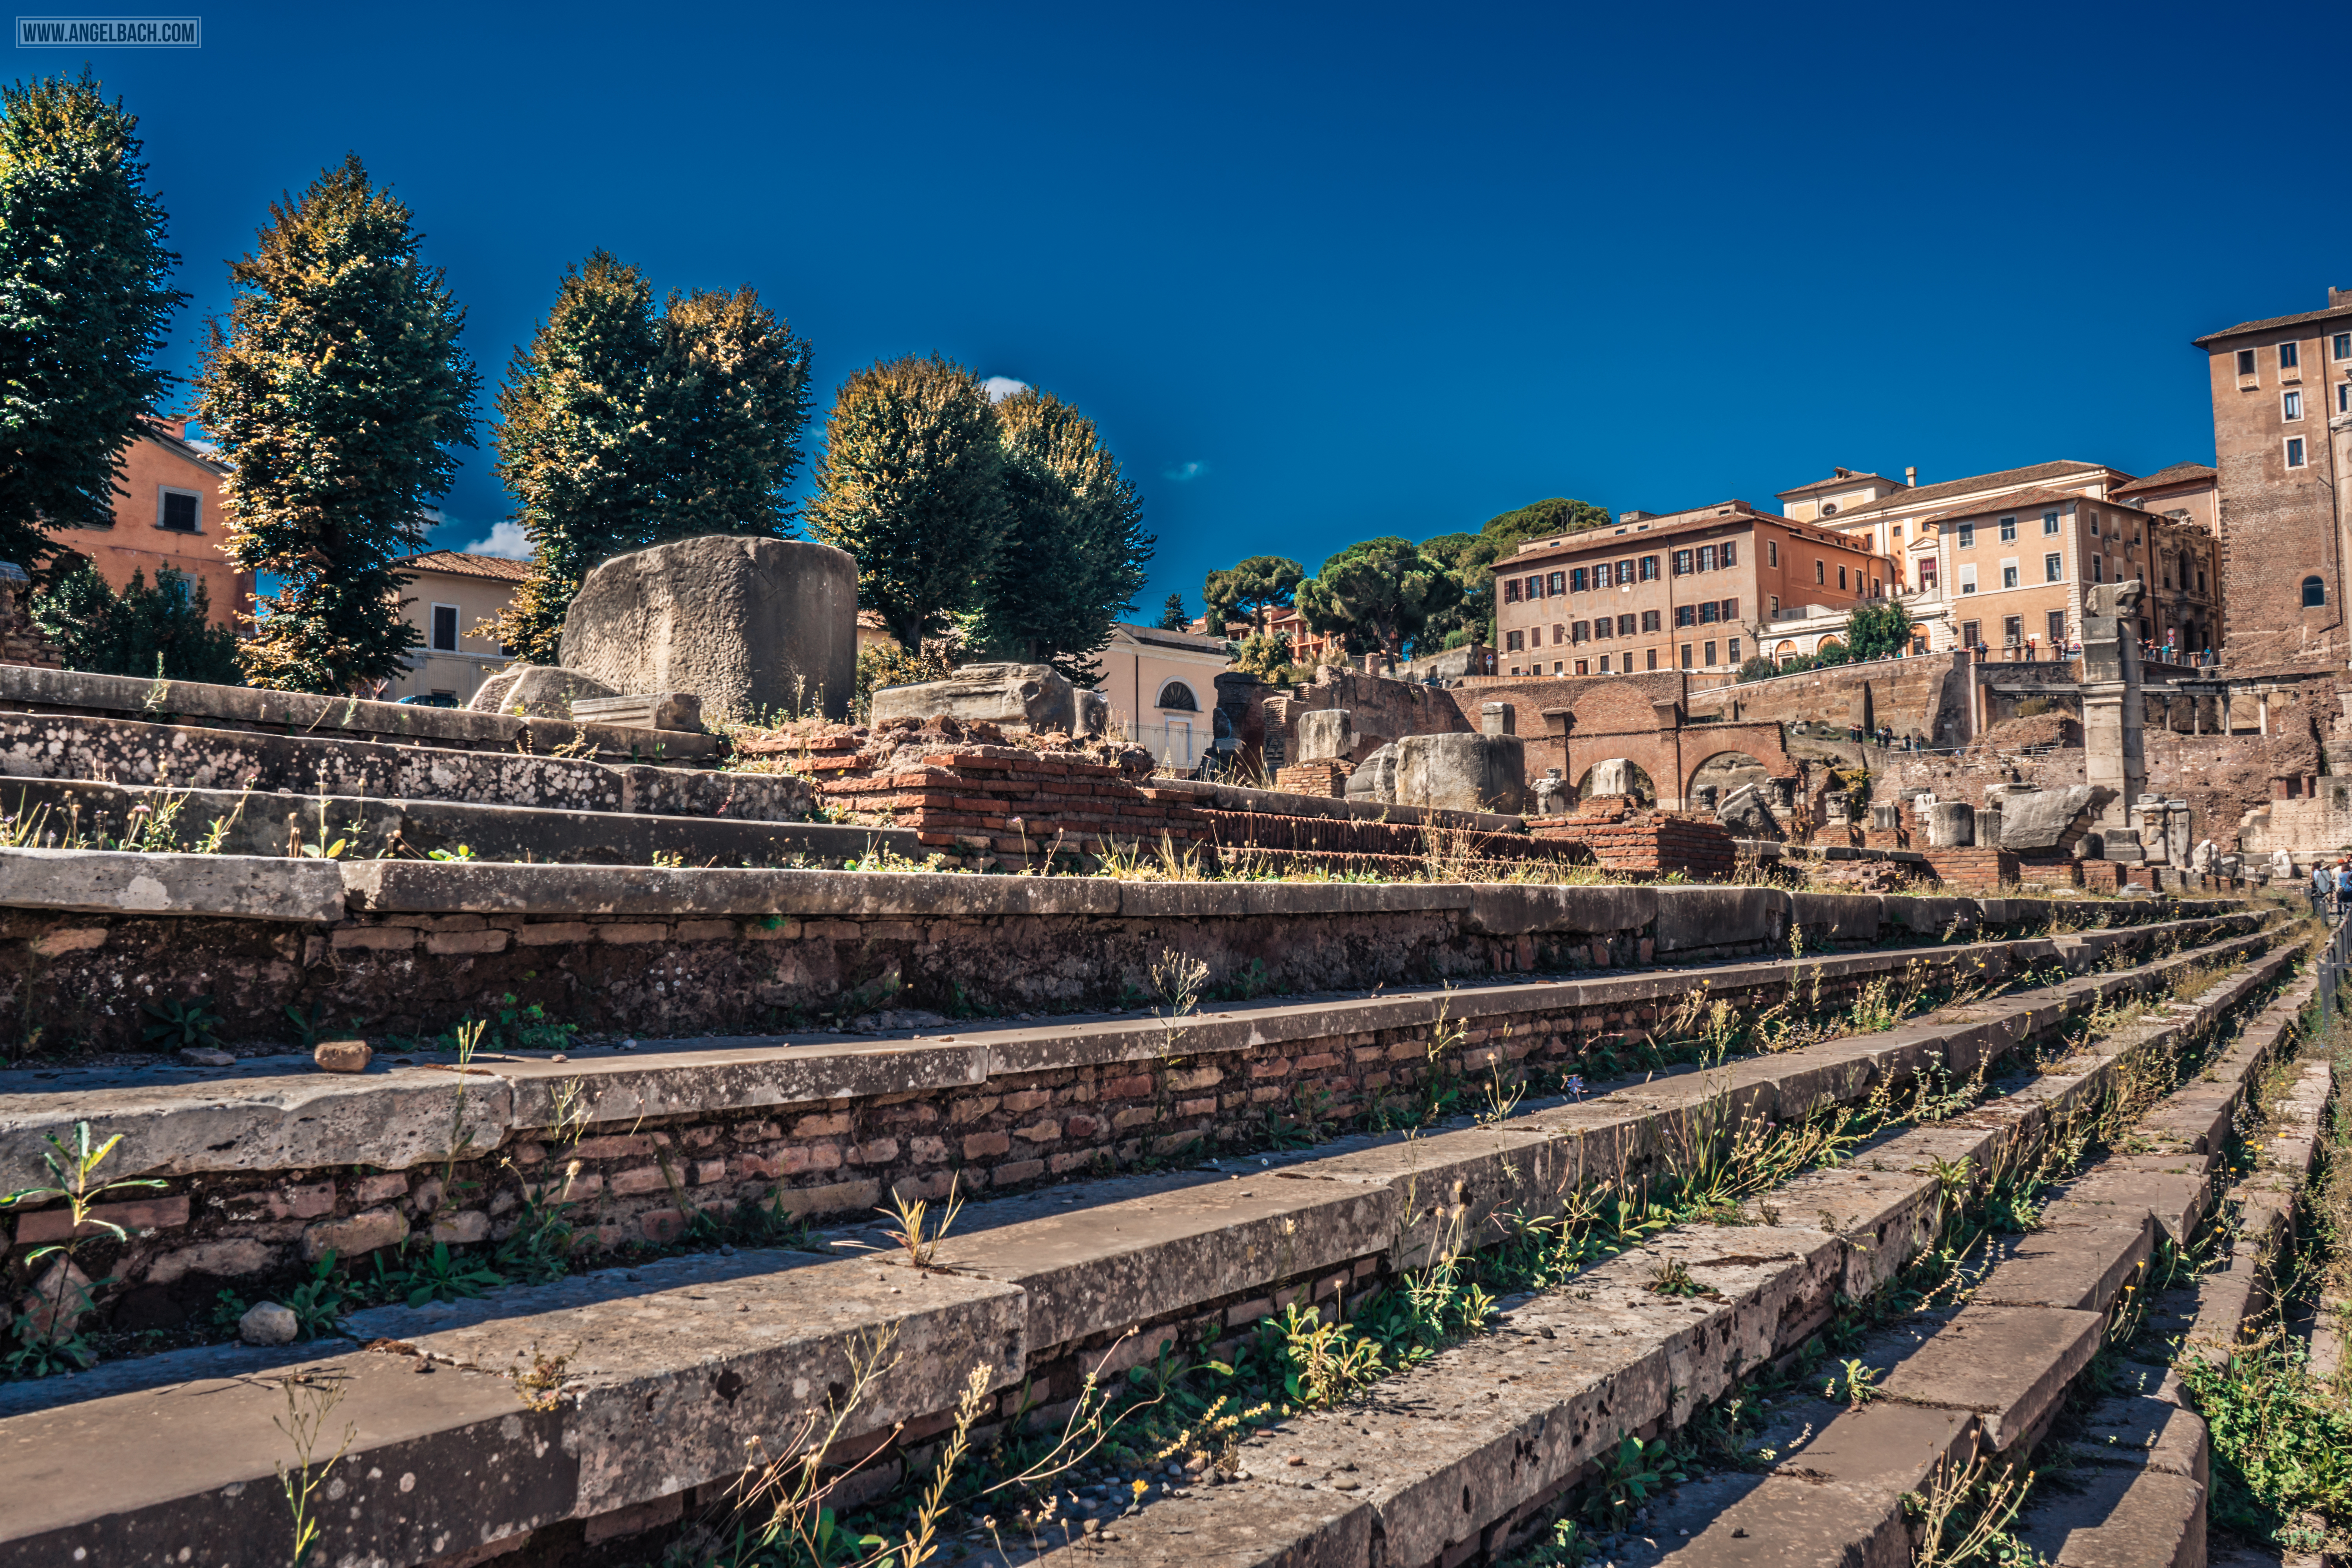 Rome, Cityscape, Leading lines, Street photography, Architecture Photography, Ancient Rome, The Forum Romanum